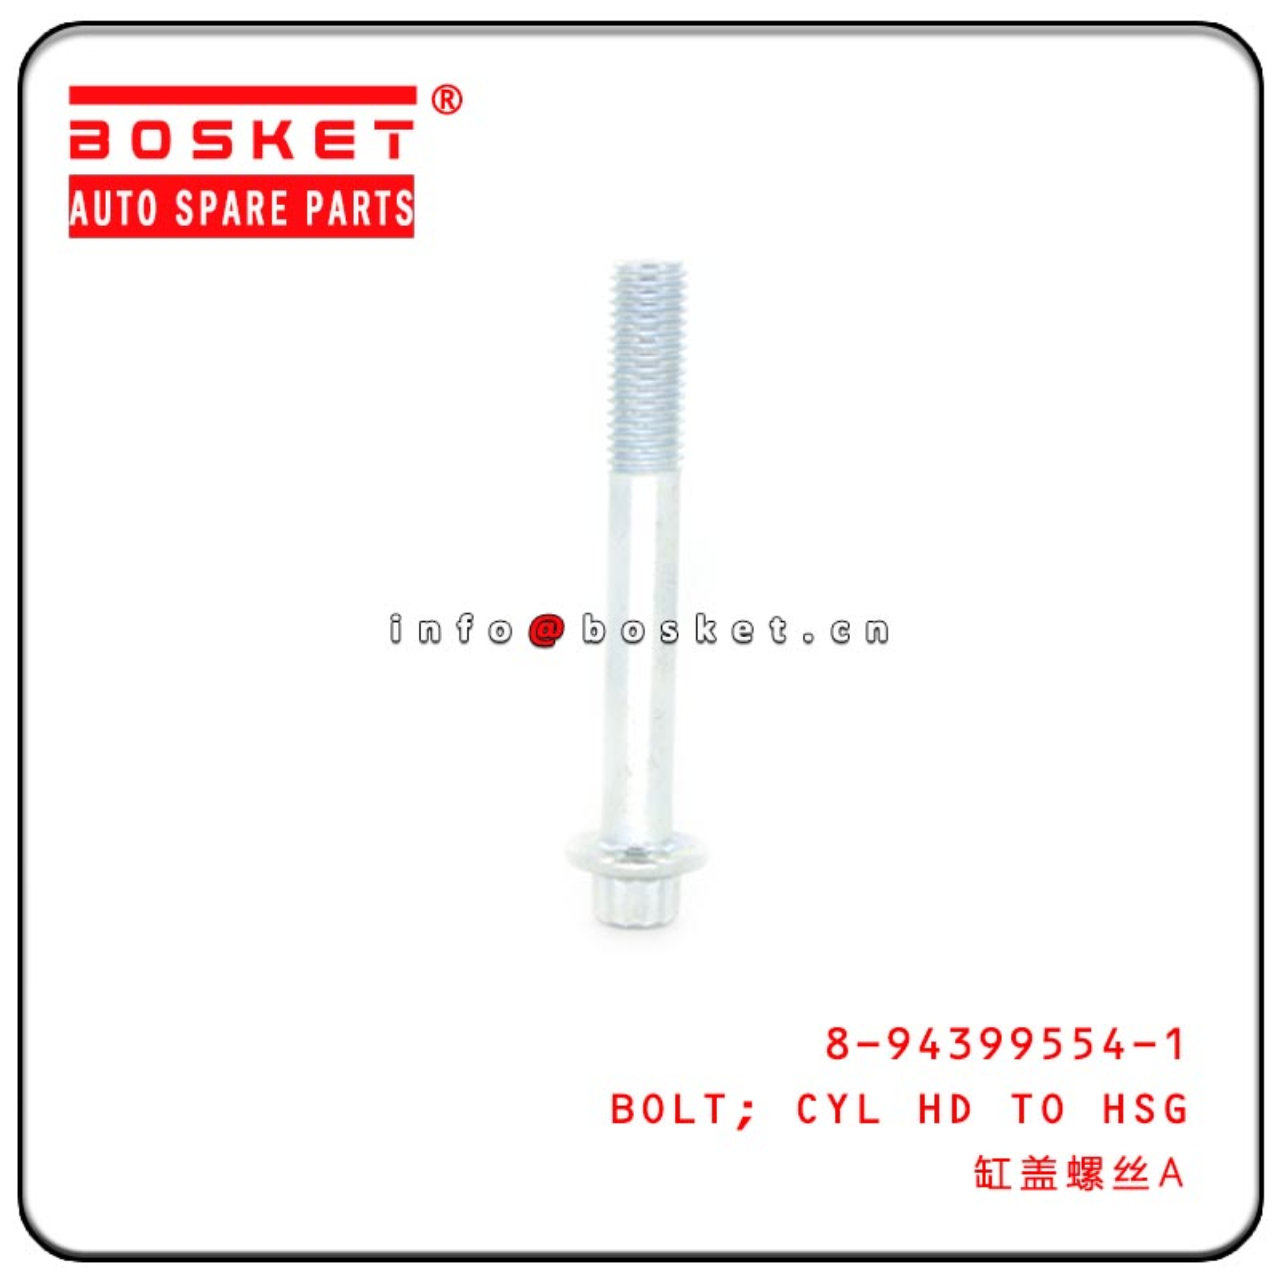 8-94399554-1  8943995541 Cylinder Head to Housing Bolt Suitable For ISUZU 6HK1 FVR34